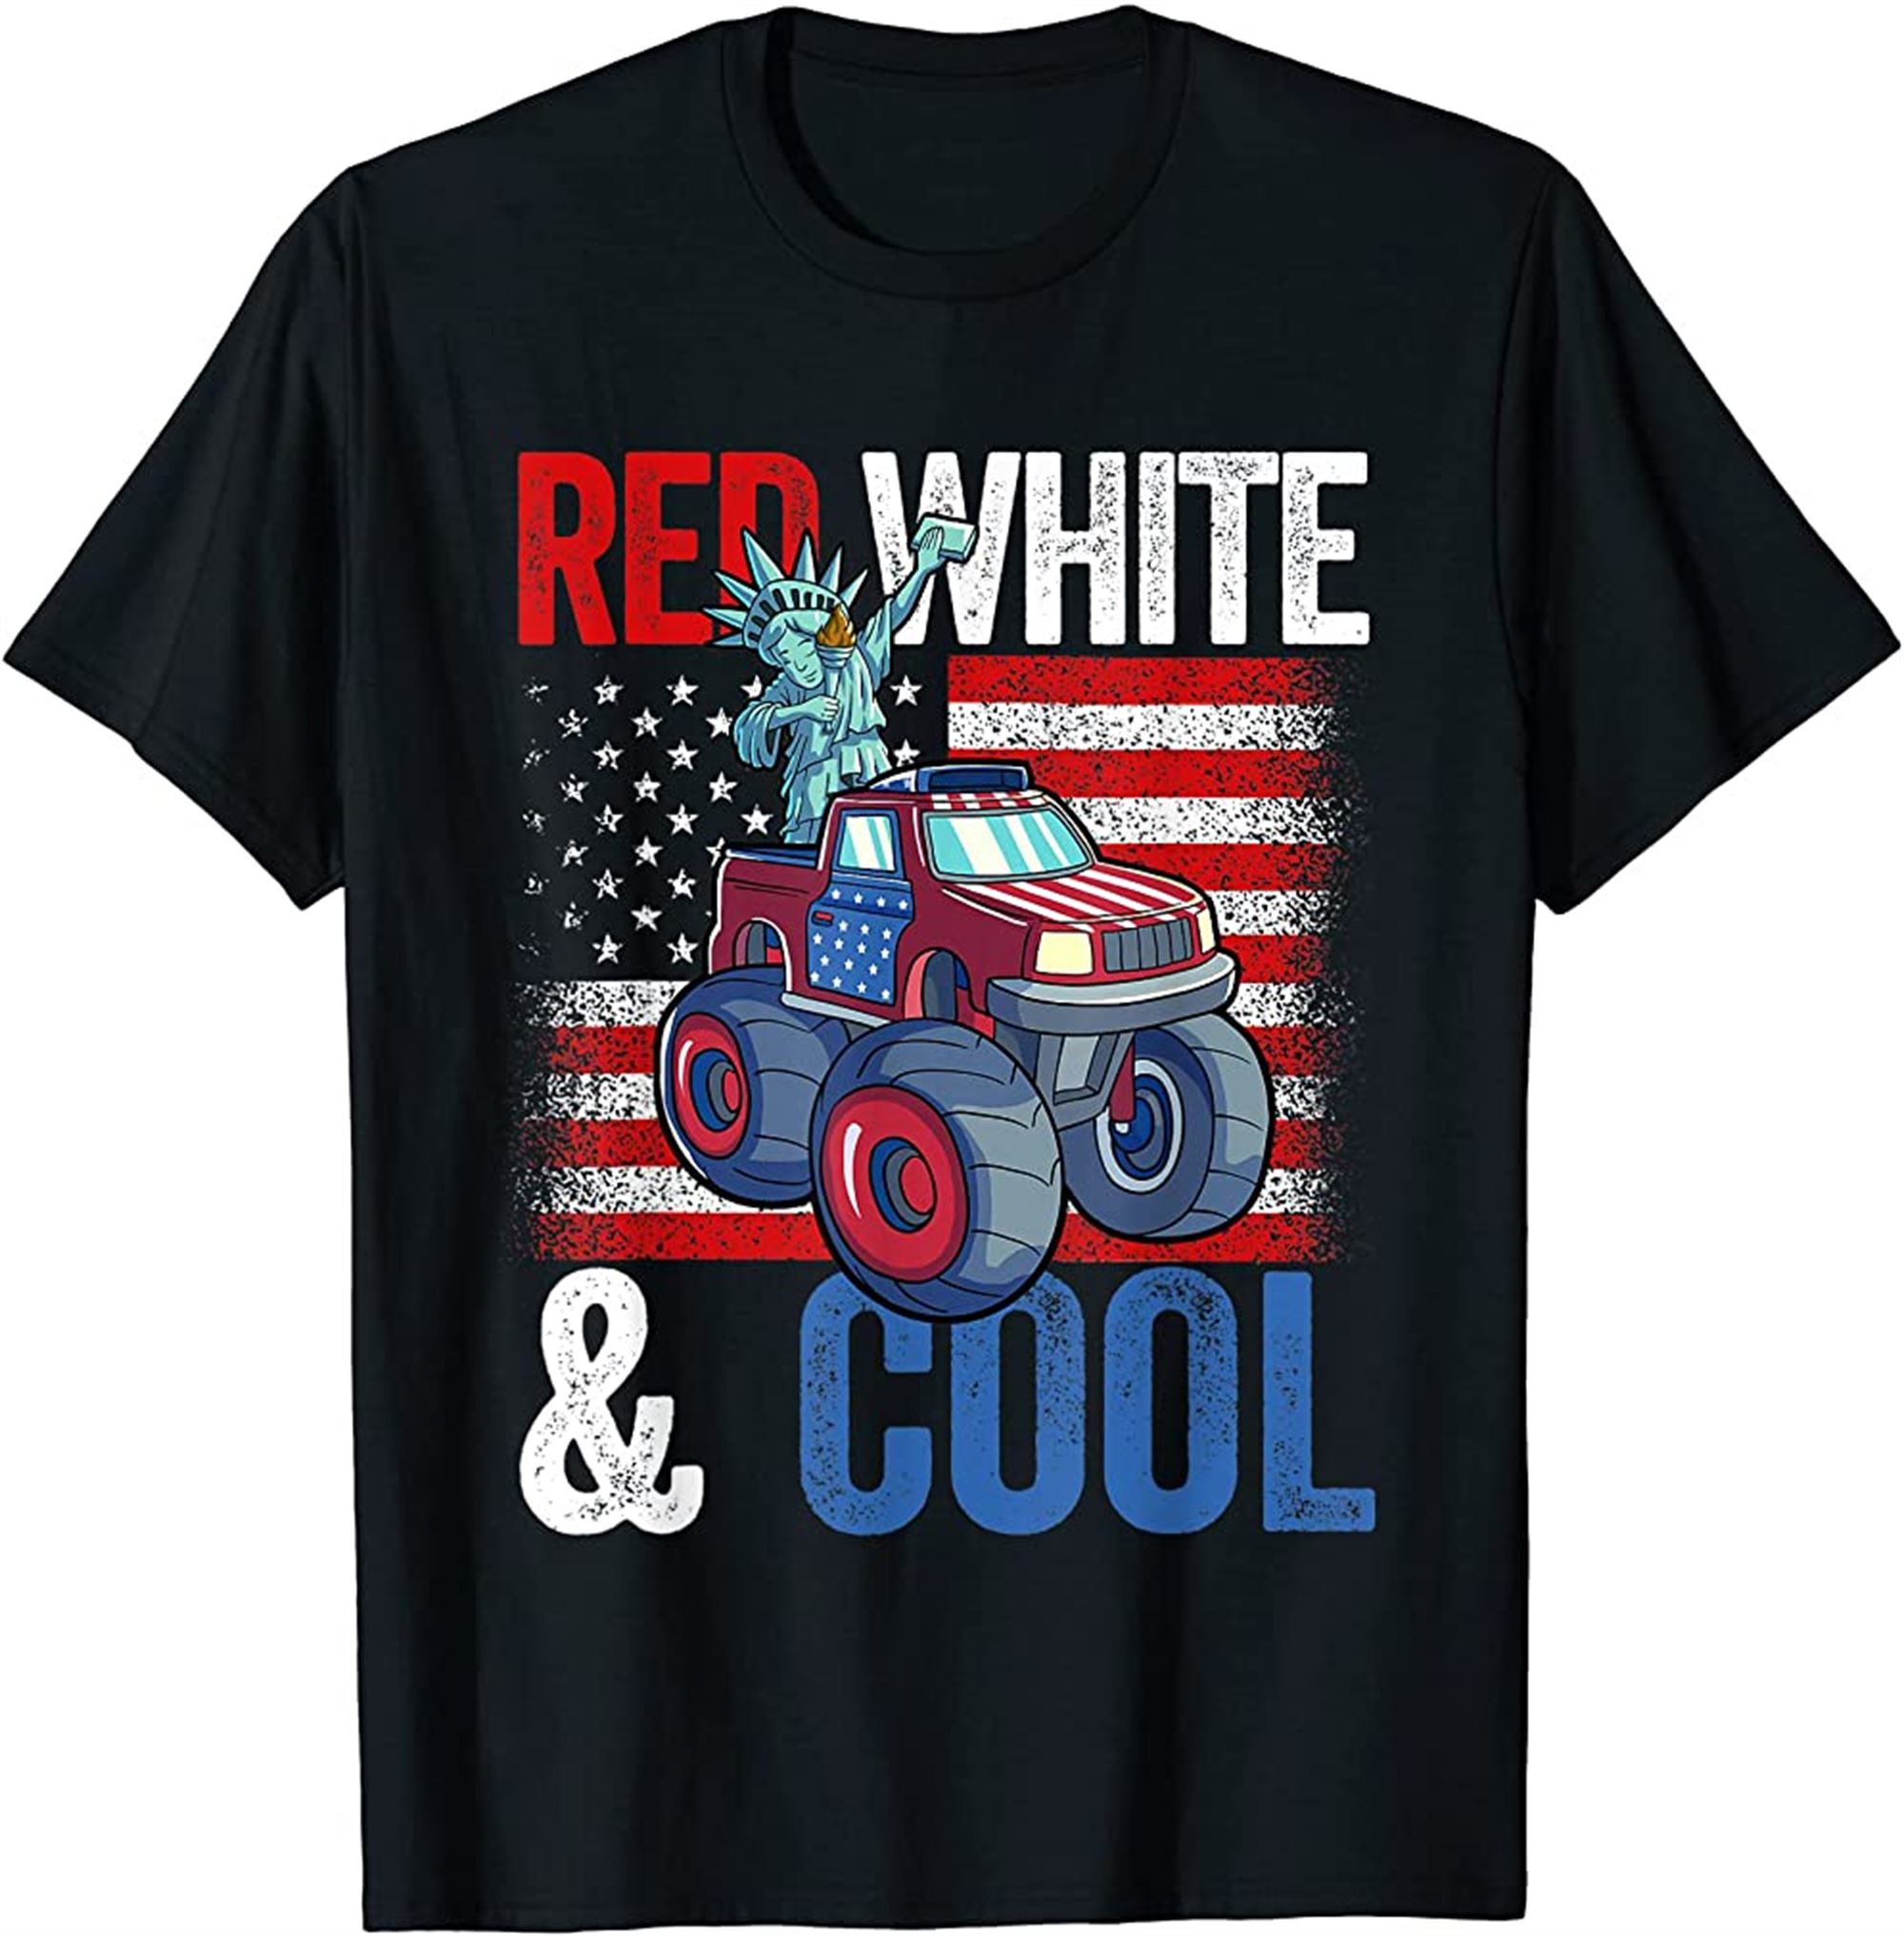 Monster Truck Statue Liberty 4th Of July Boys American Flag T-shirt Size Up To 5xl